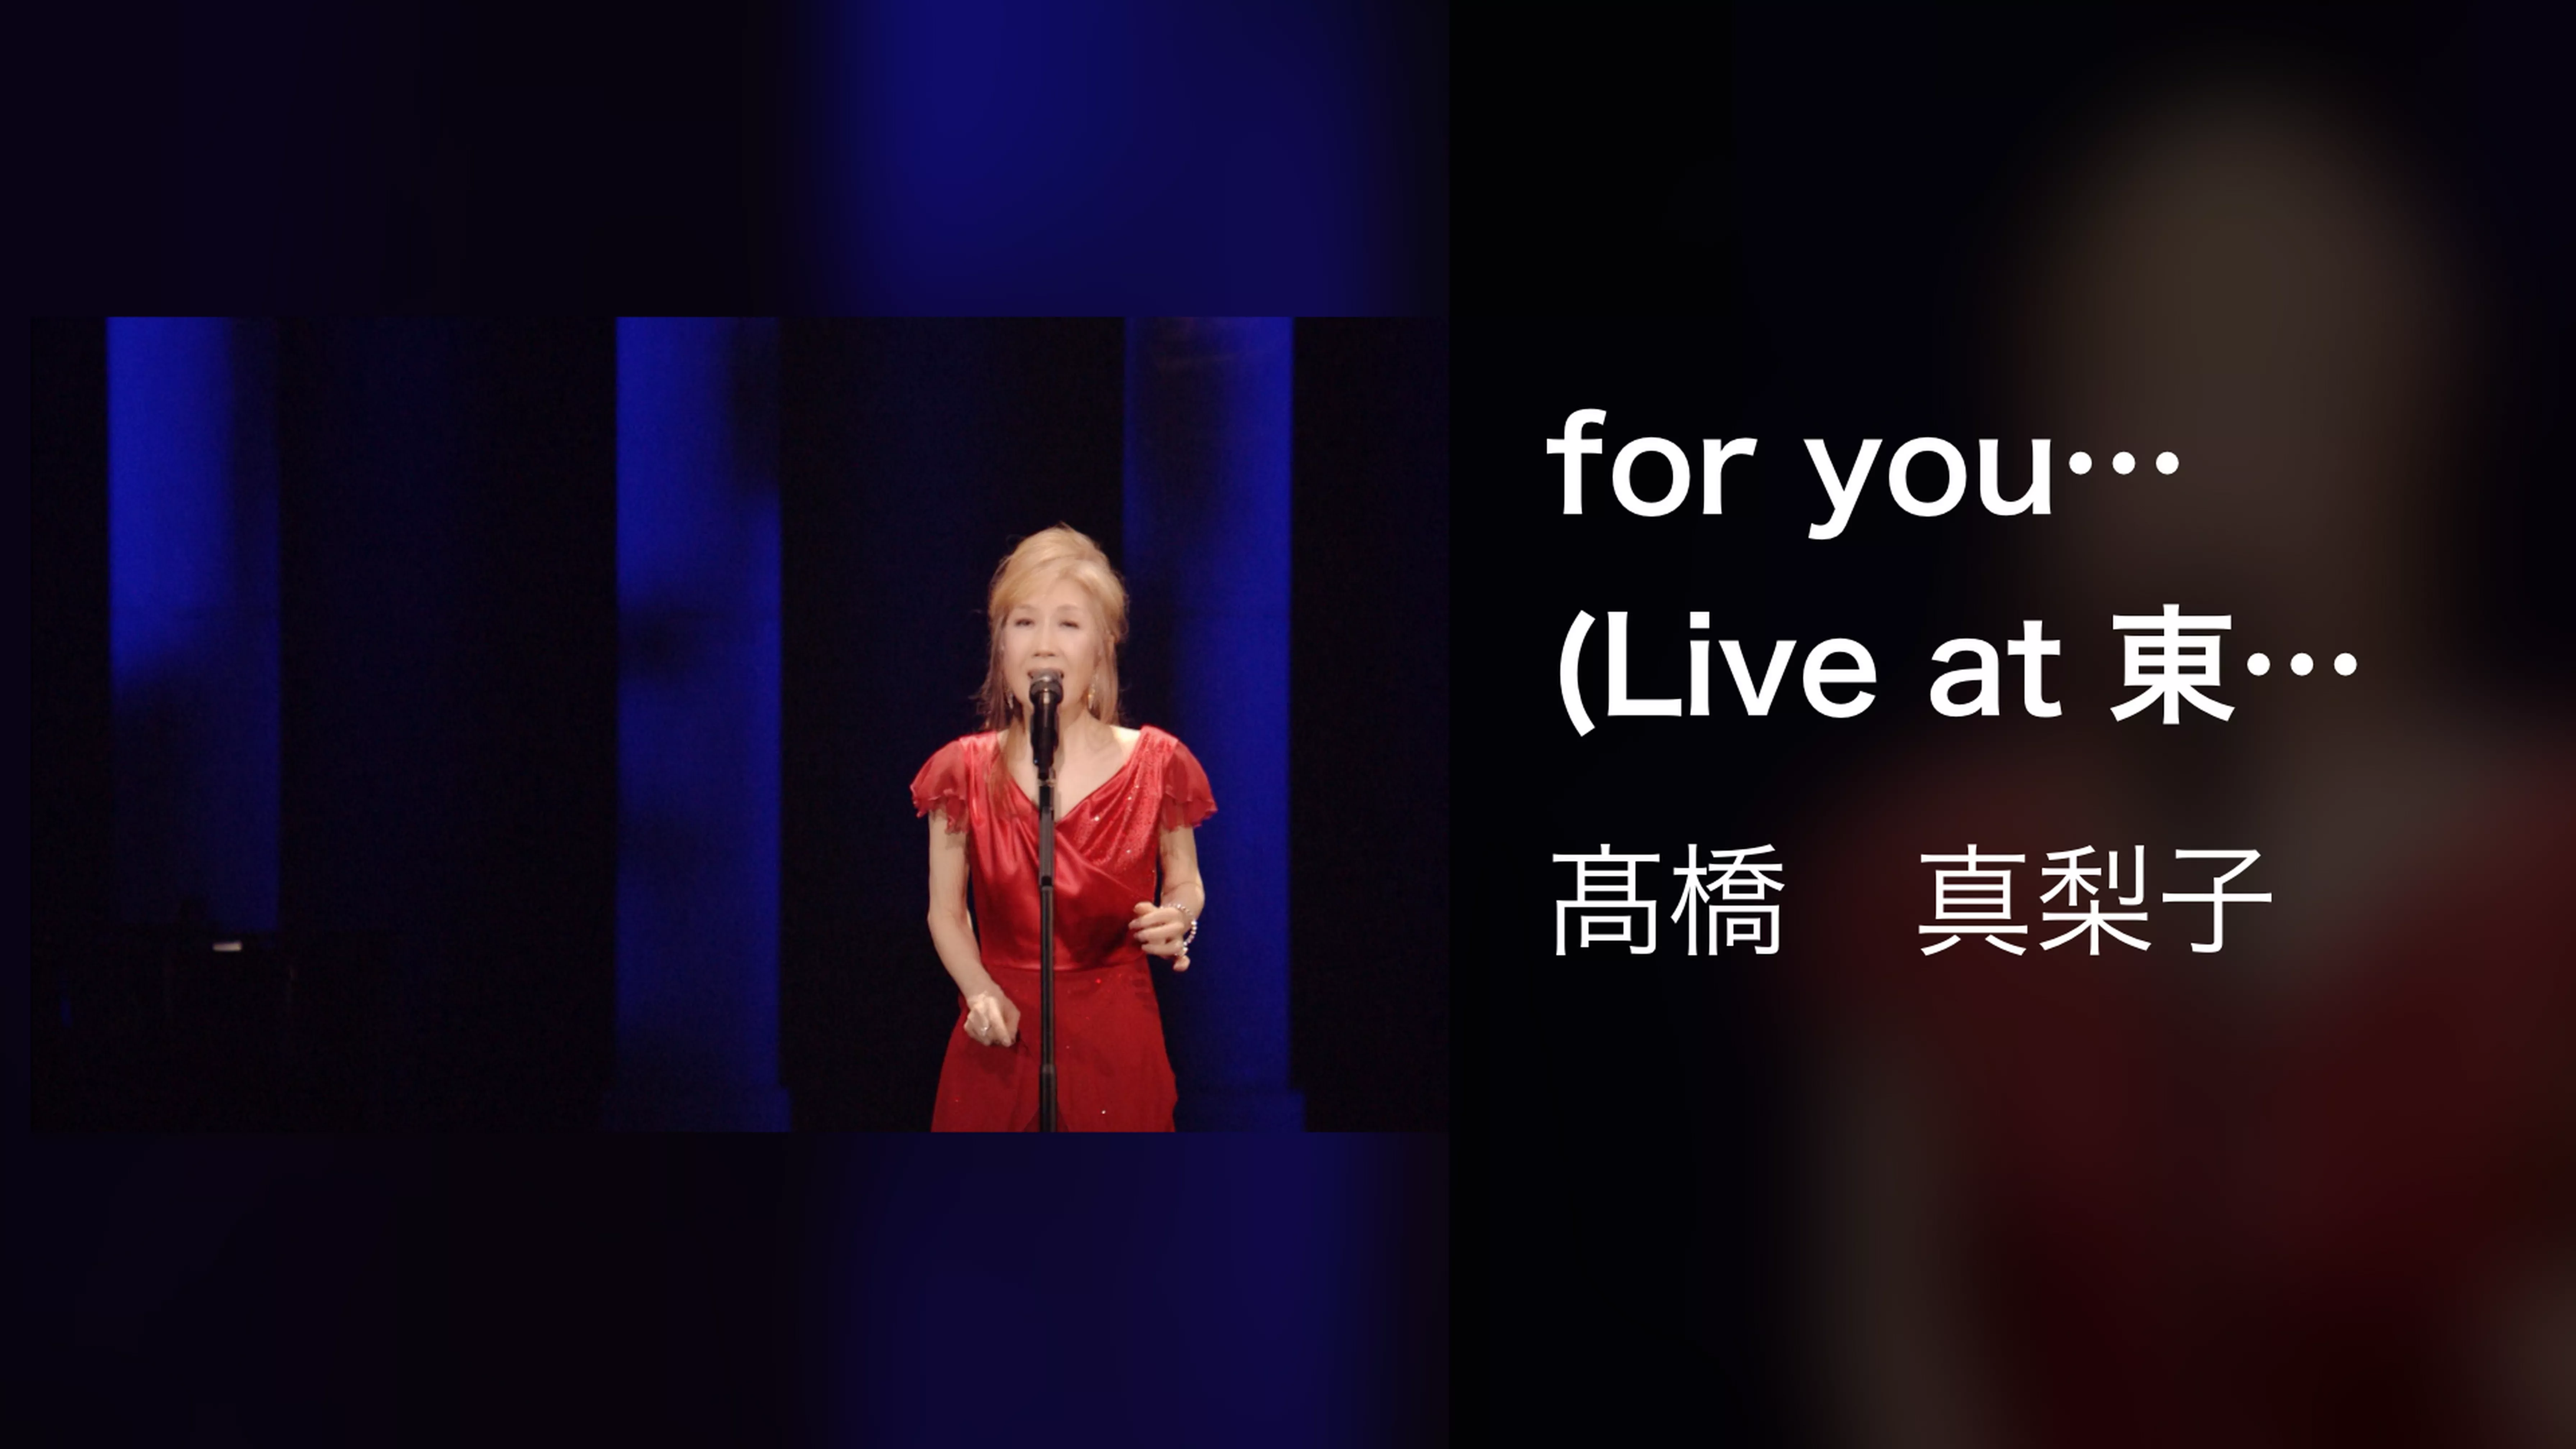 for you...(Live at 東京国際フォーラム ホール A on November 19, 2016)